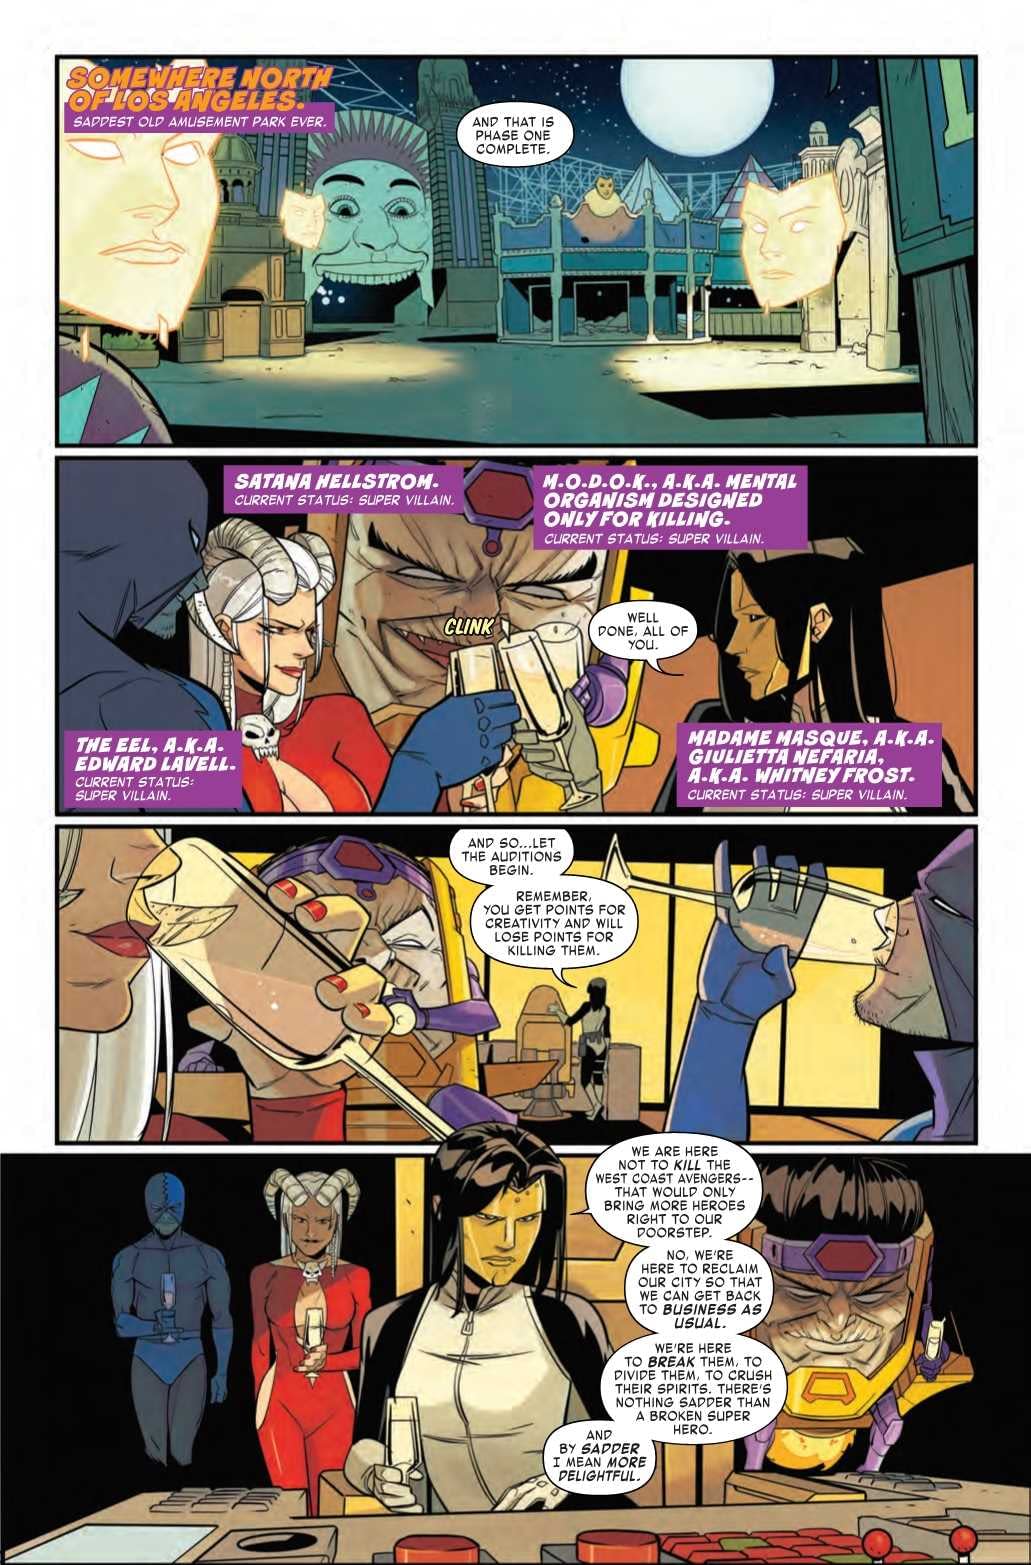 Relationship Troubles Abound in Next Week's West Coast Avengers #6